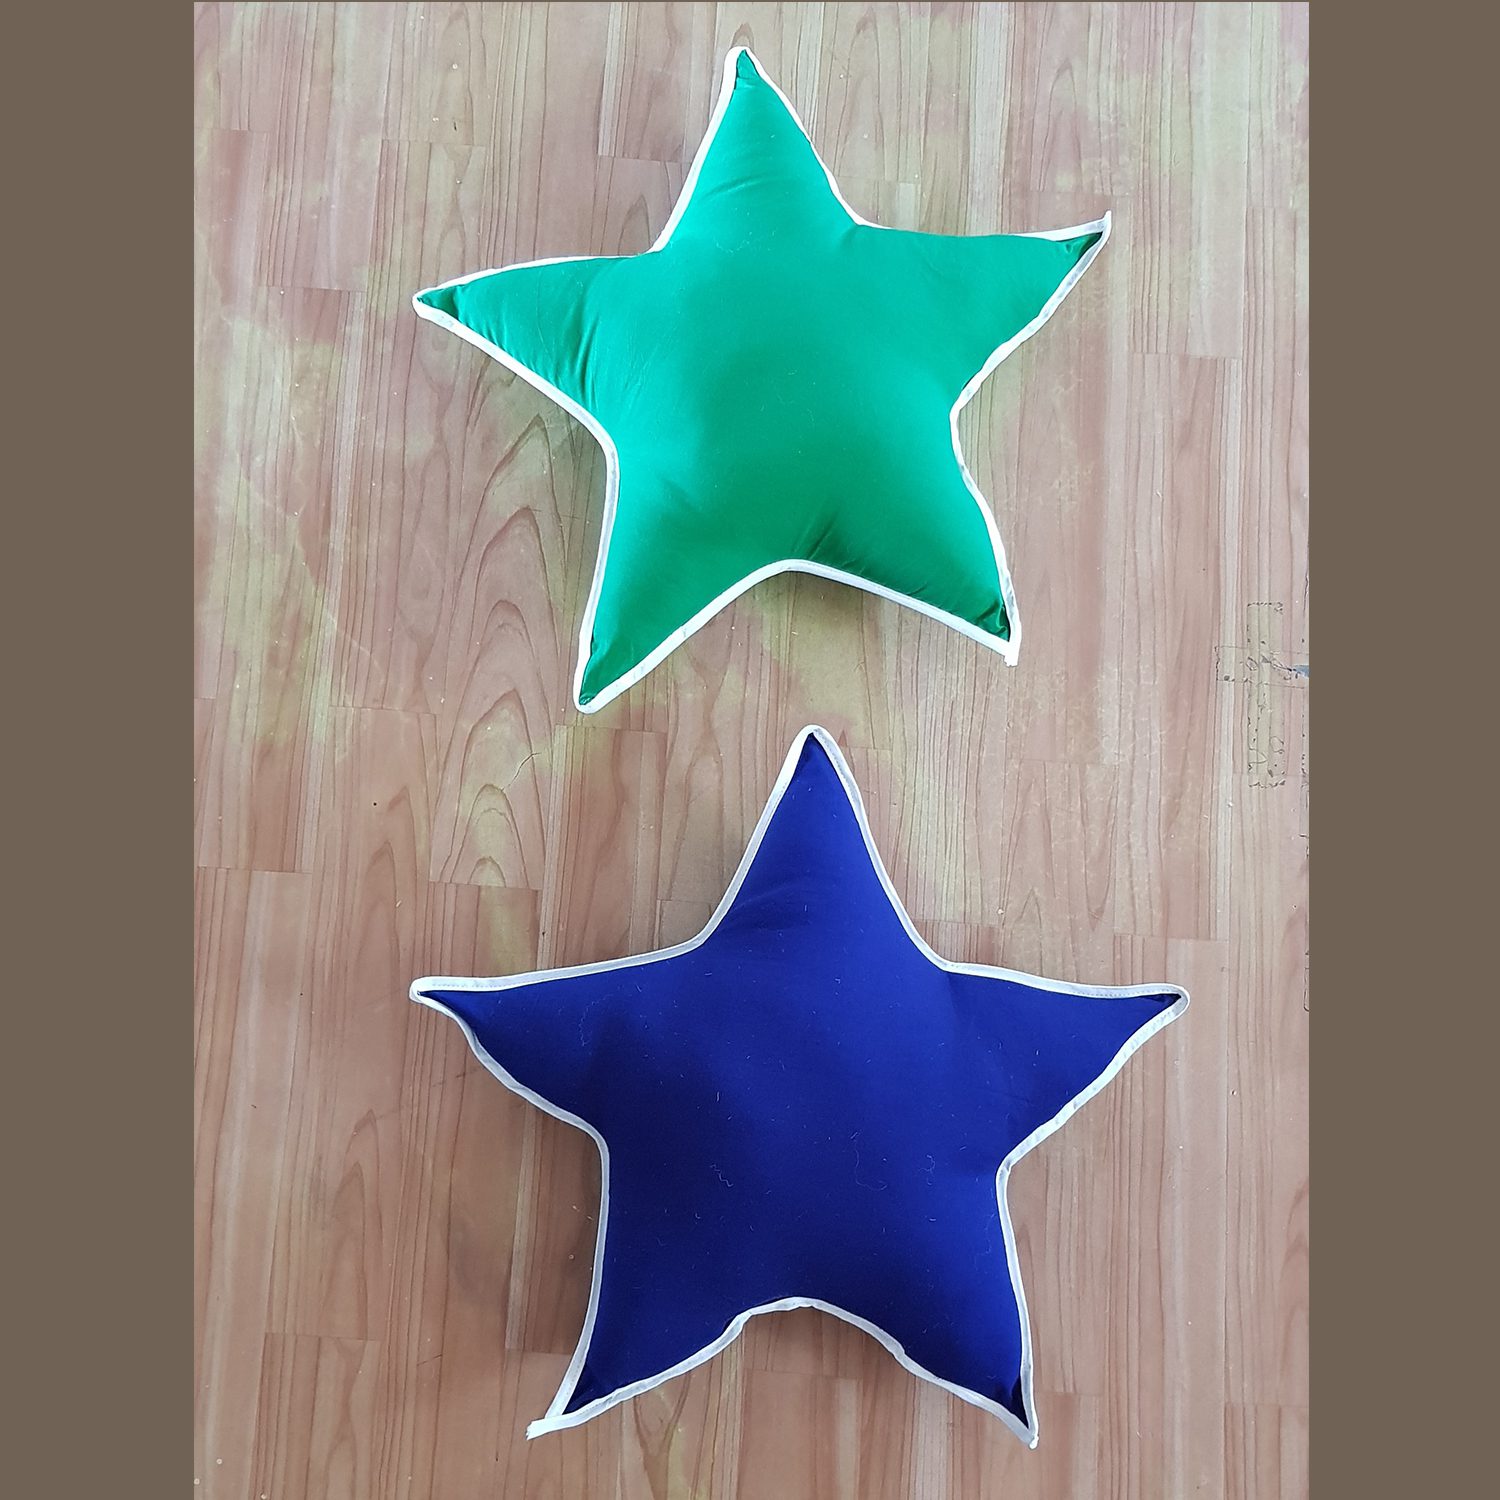 star cushions for kids